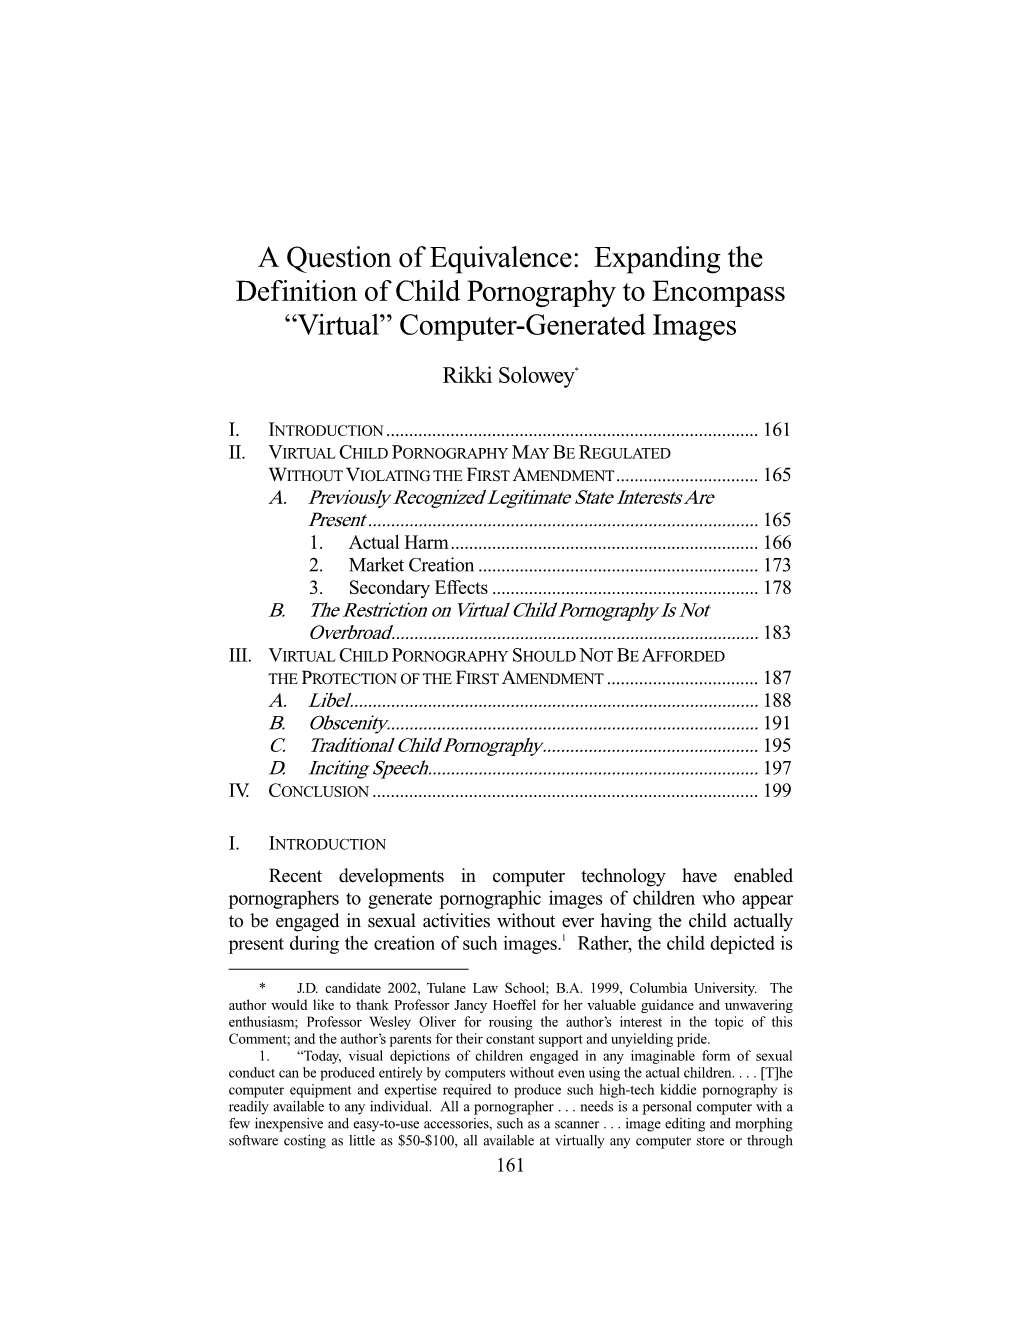 Expanding the Definition of Child Pornography to Encompass “Virtual” Computer-Generated Images